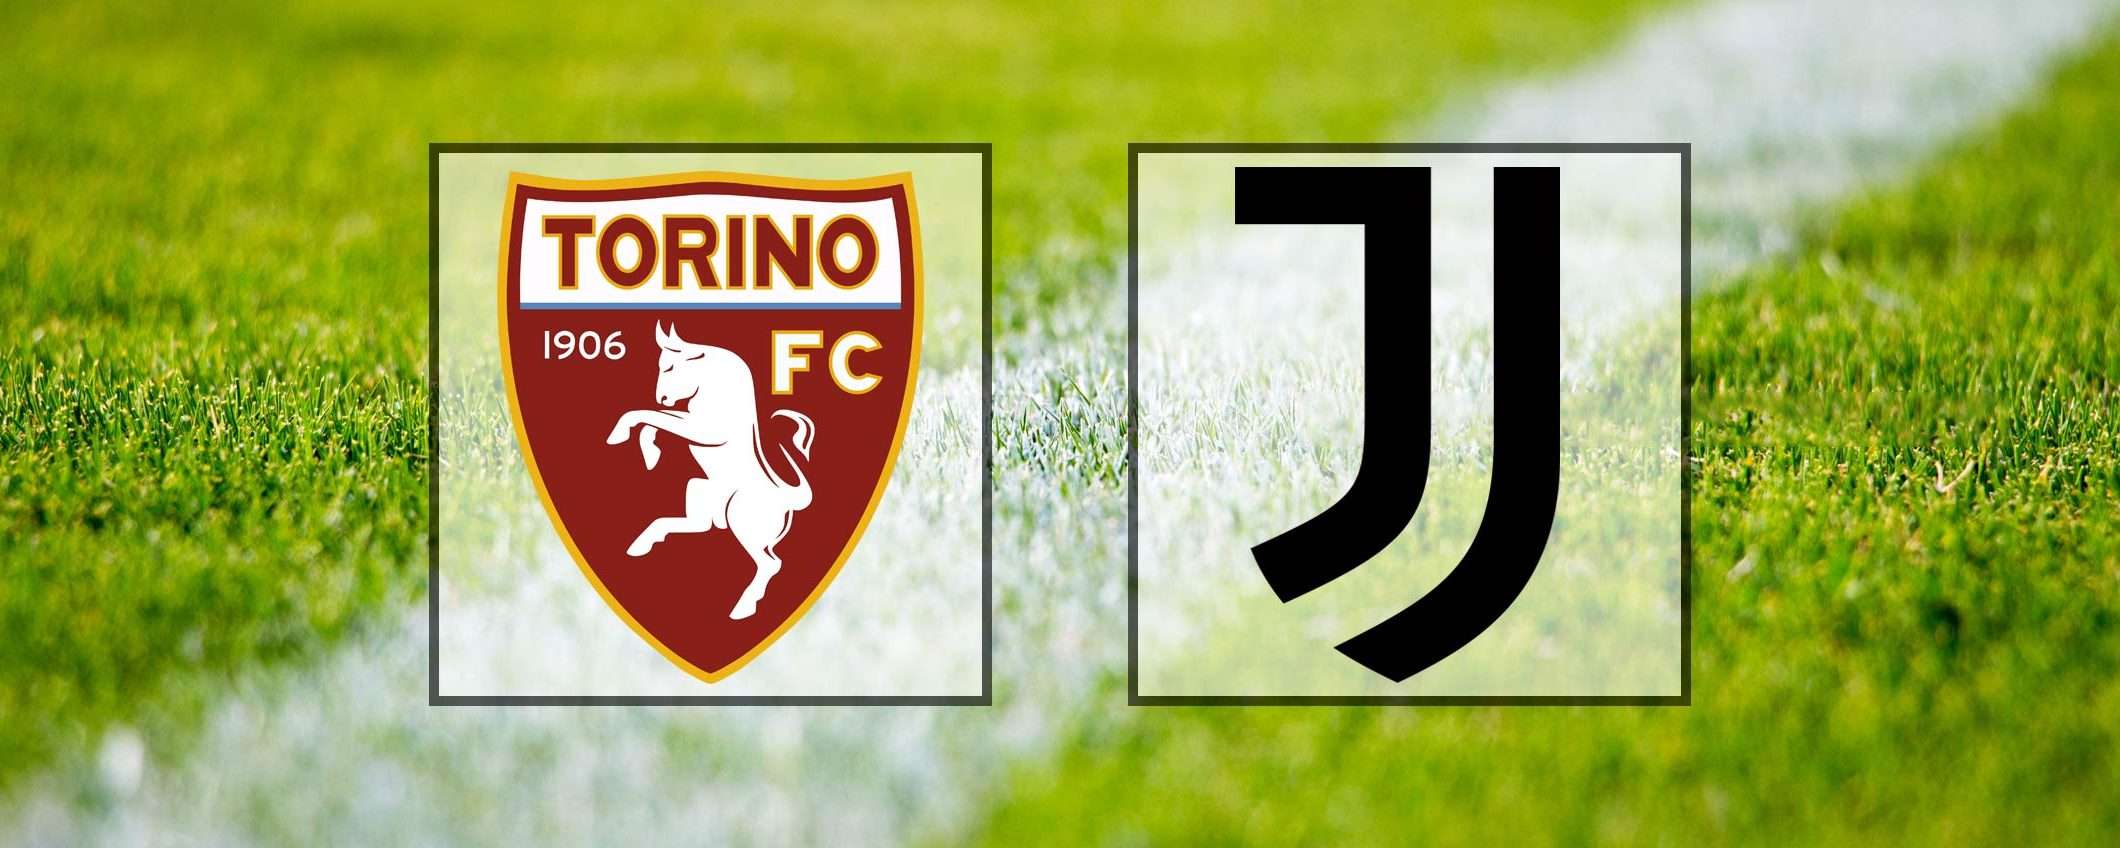 Come vedere Torino-Juventus in streaming (Serie A)